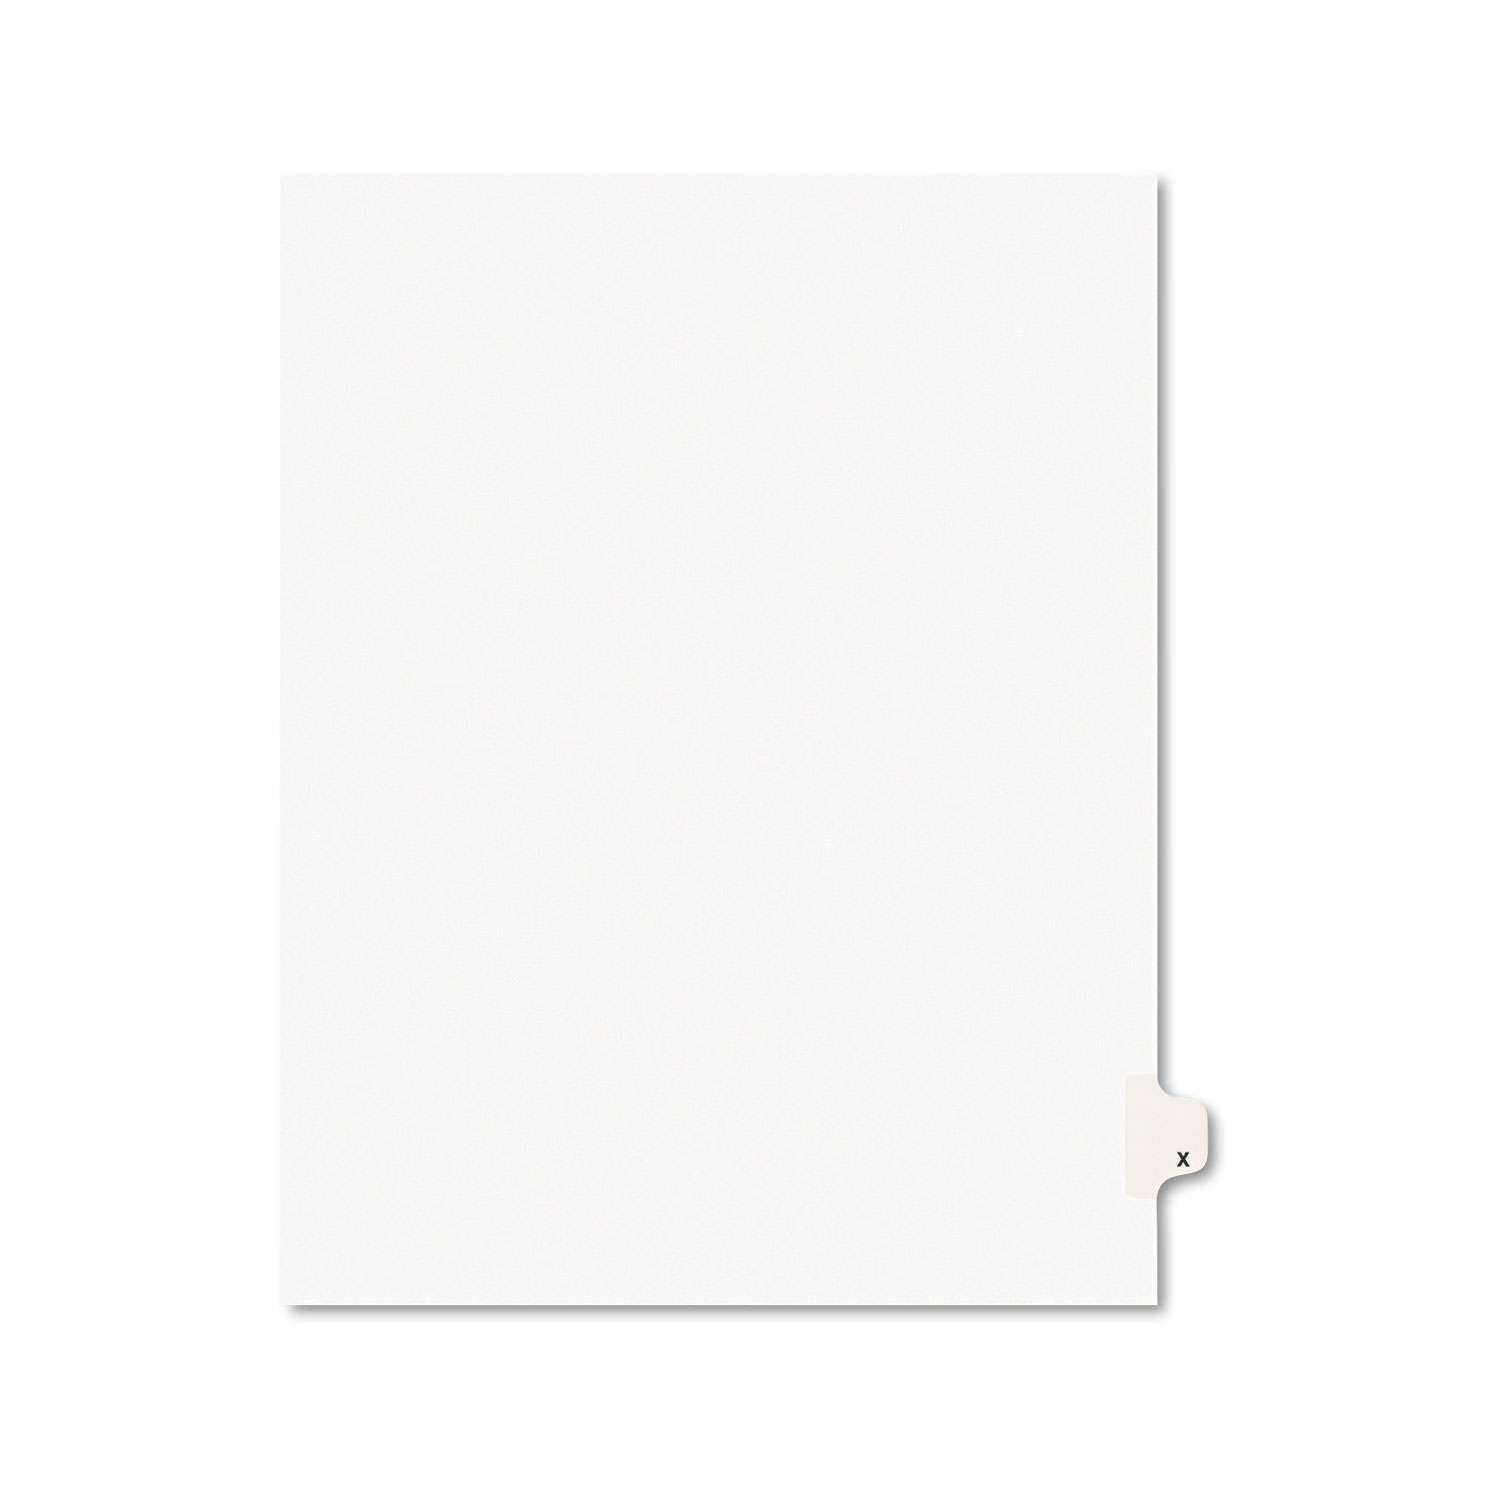  Avery 01424 Preprinted Legal Exhibit Side Tab Index Dividers, Avery Style, 26-Tab, X, 11 x 8.5, White, 25/Pack (AVE01424) 